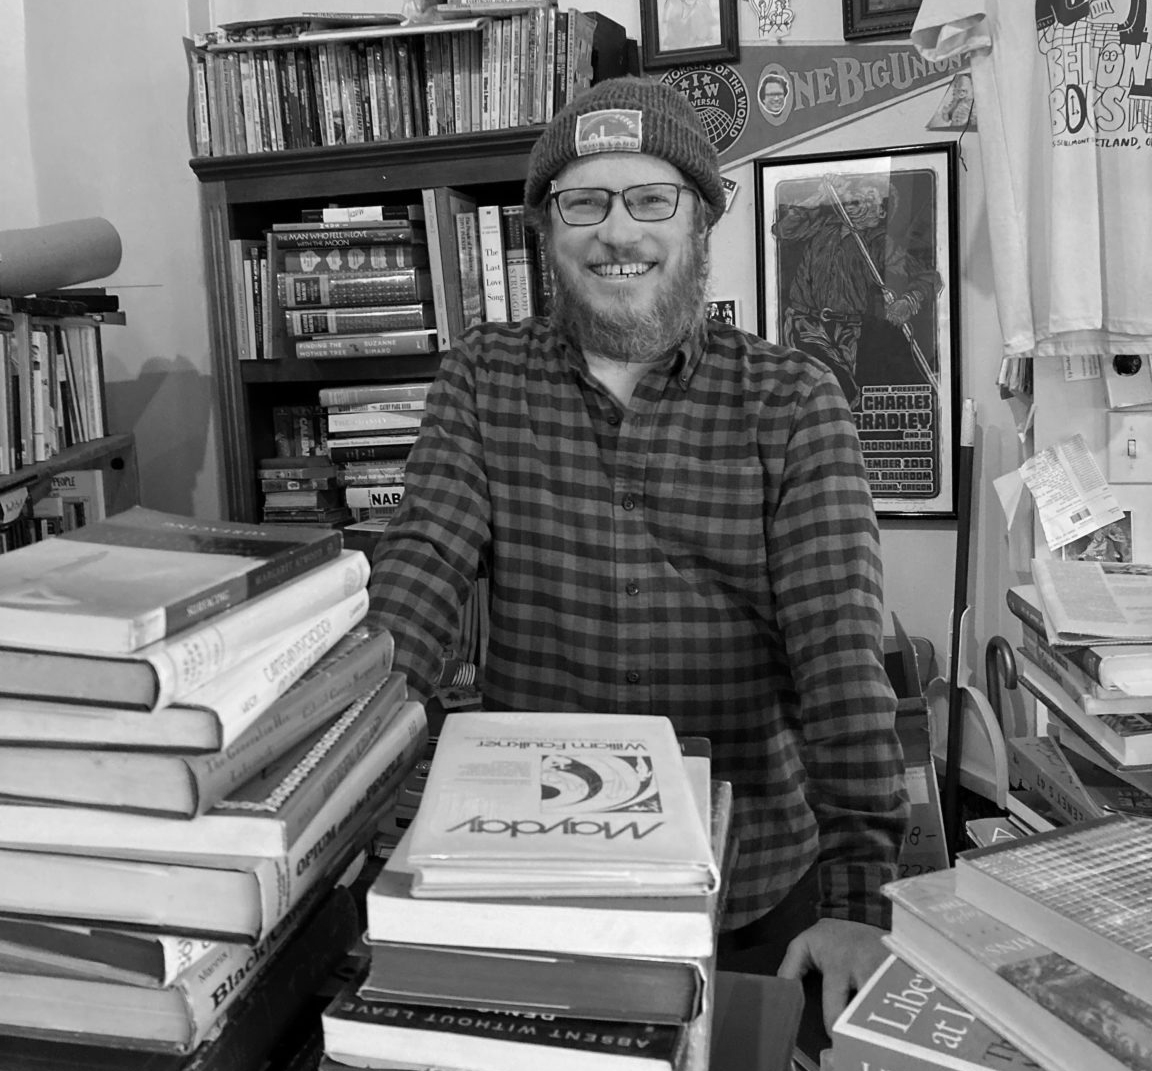 Getting to Know Your Neighbors: Joe Witt, owner of Belmont Books